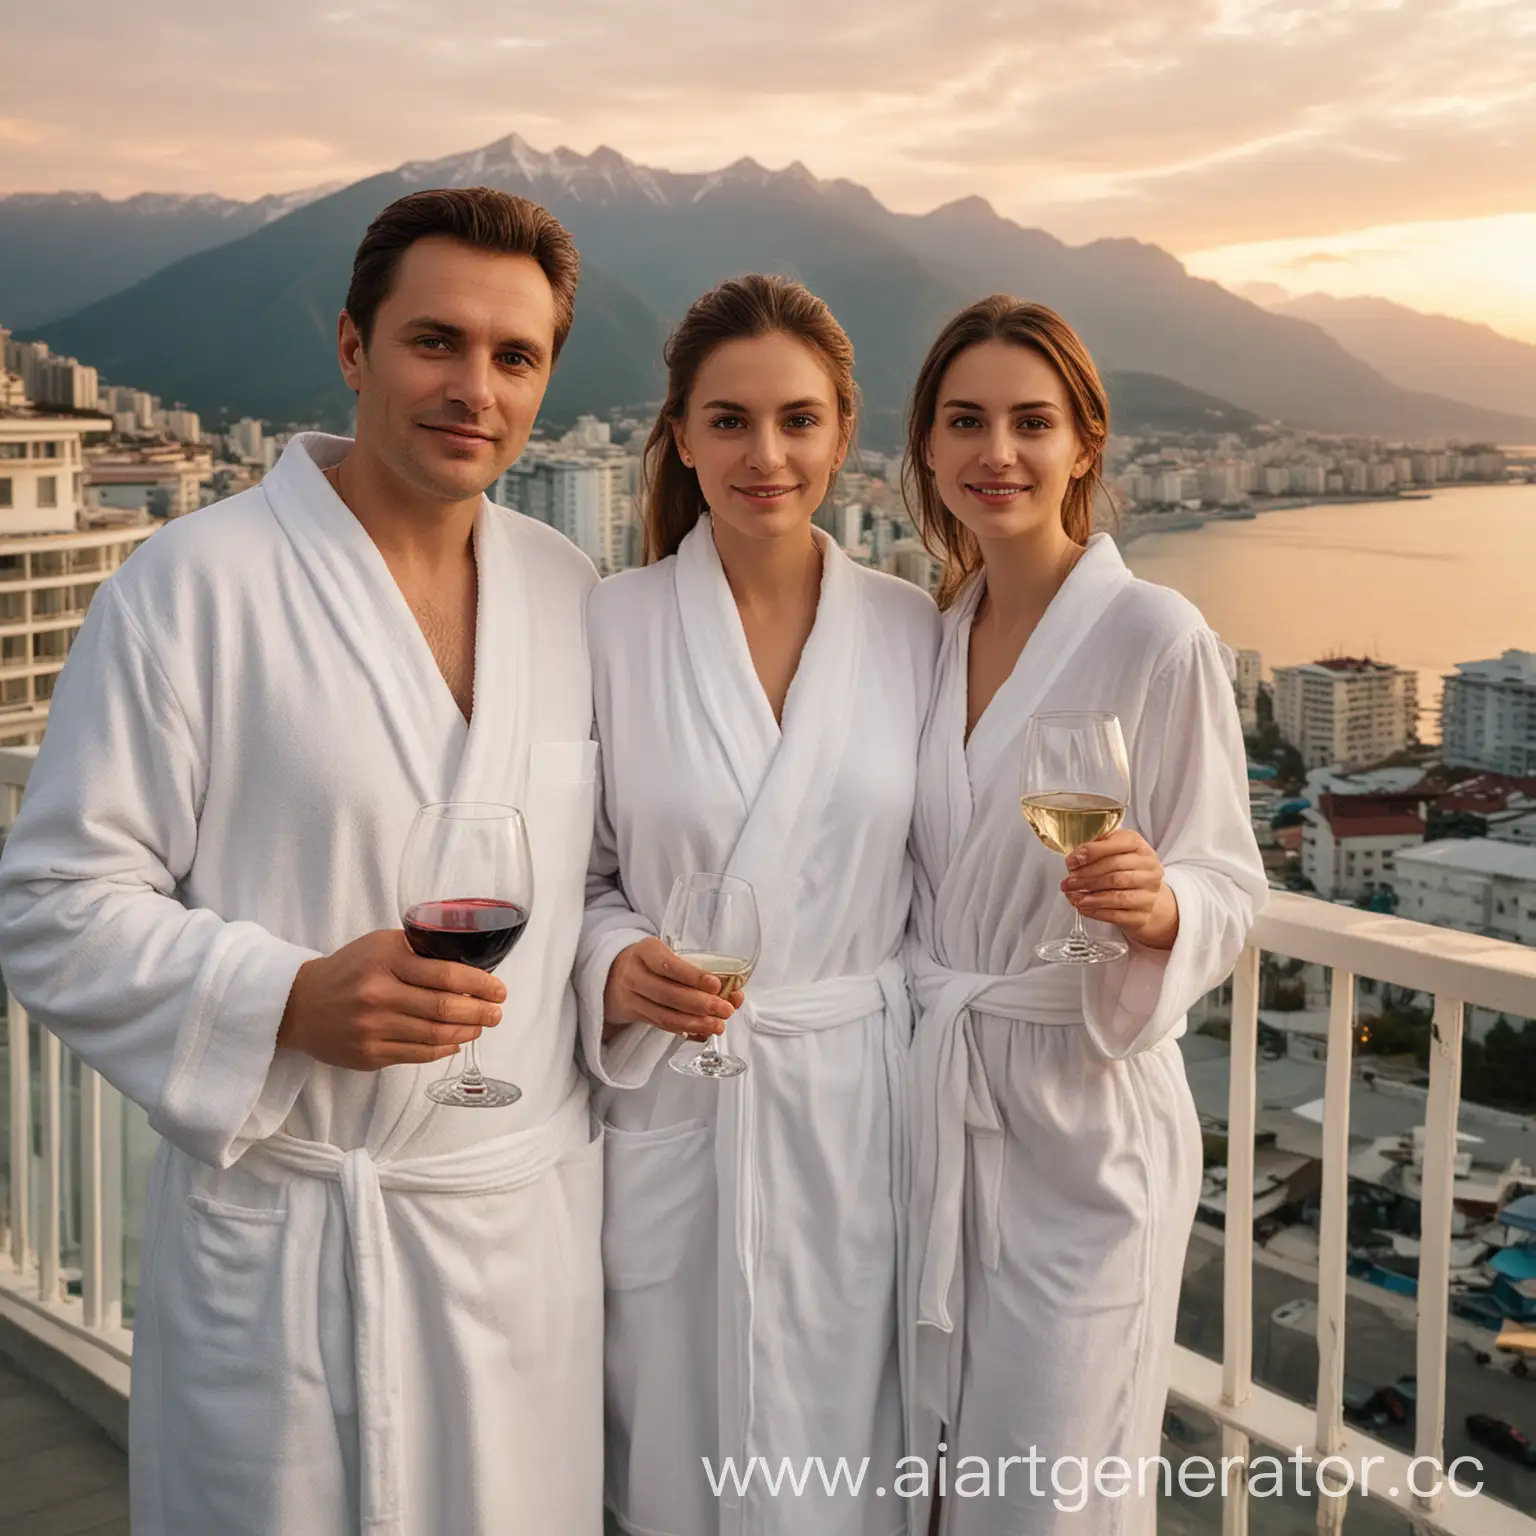 Couple-in-White-Robes-Toasting-with-Wine-on-Sochi-Hotel-Balcony-at-Sunset